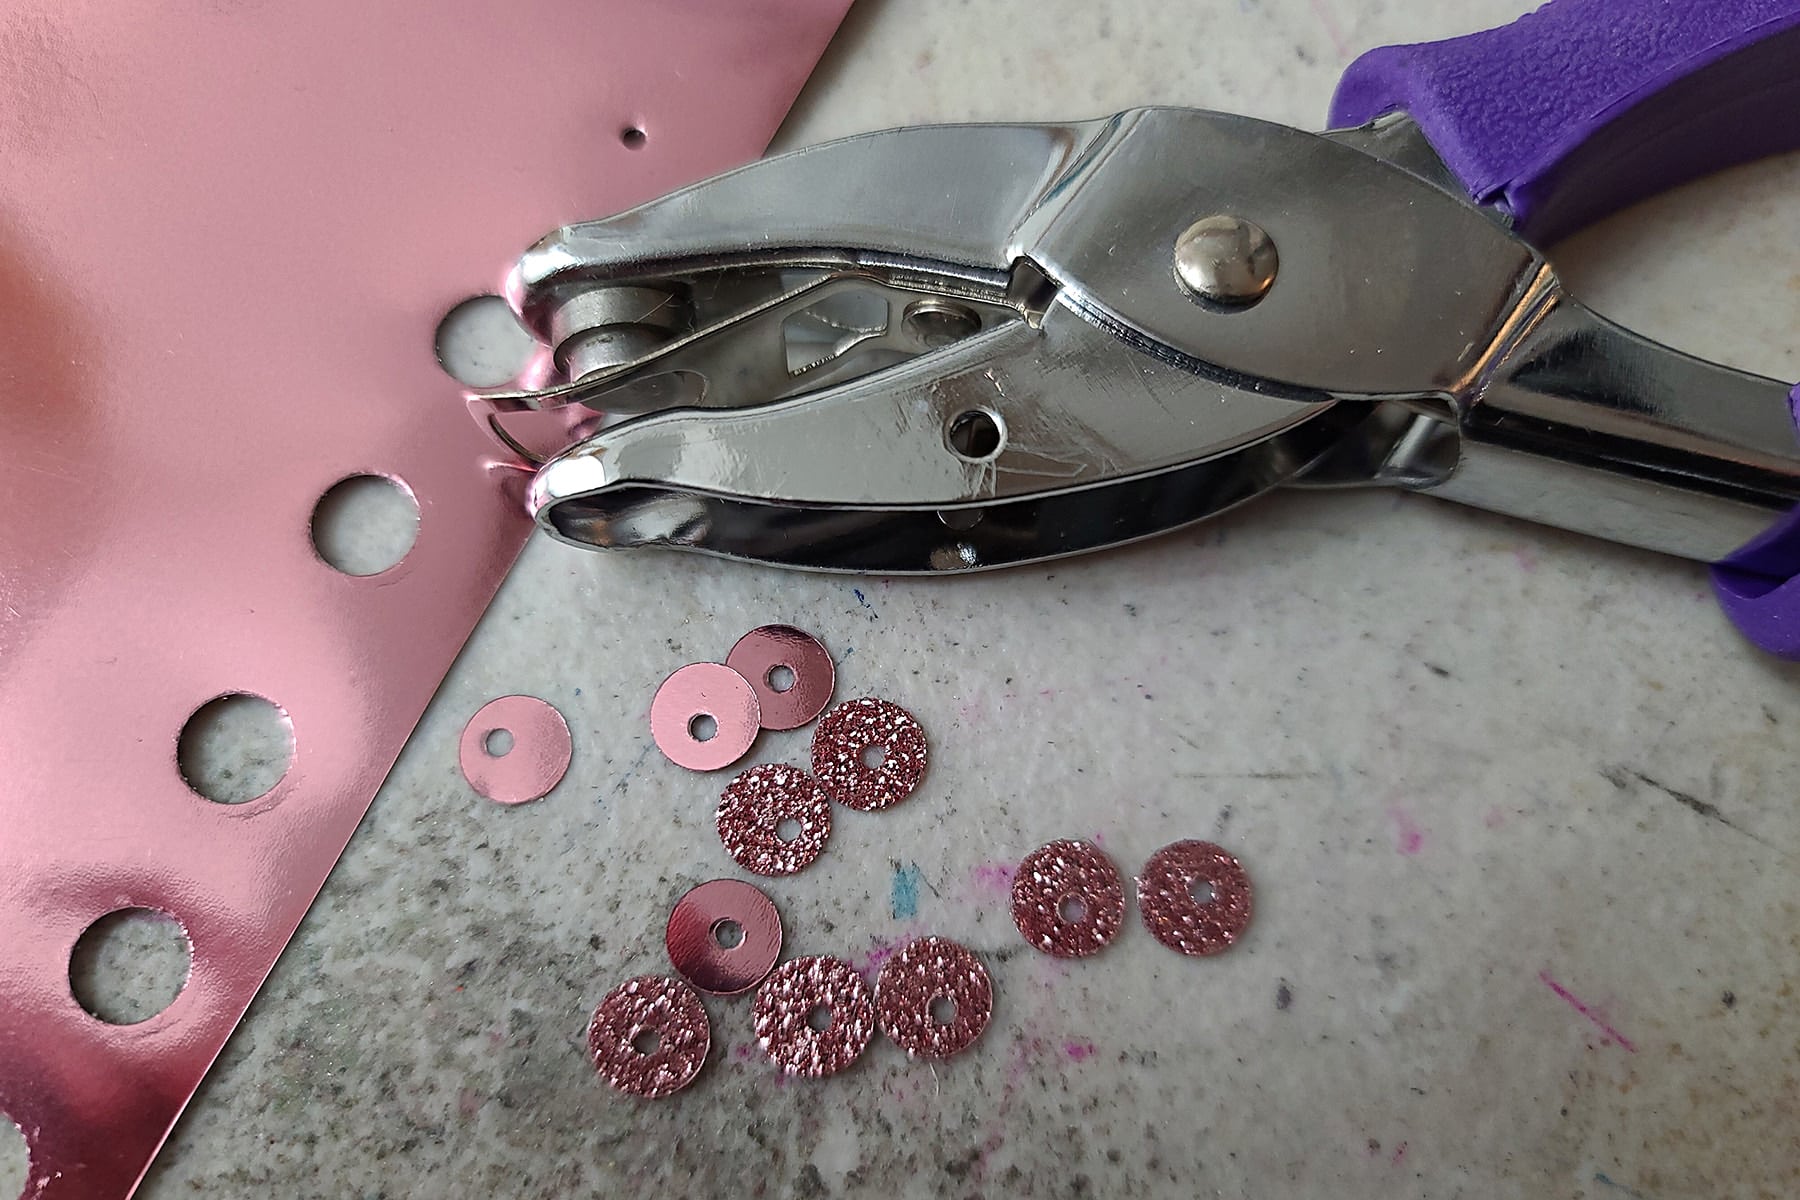 A hole punch is being used to make sequins. There is a small pile of pink sequins on the surface below the hole punch.